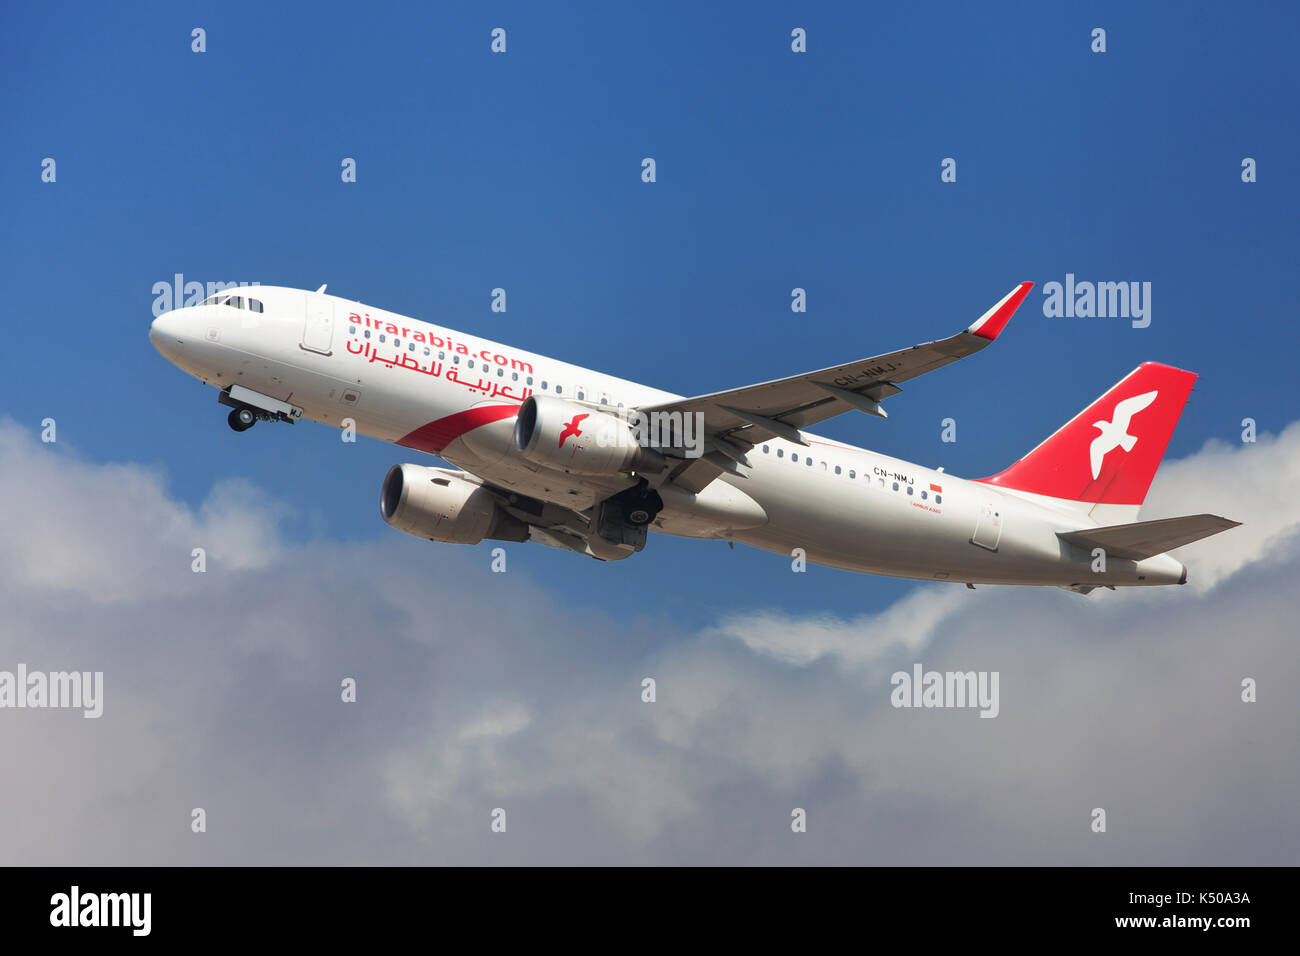 Barcelona, Spain - August 9, 2017: Air Arabia Maroc Airbus A320 taking off from El Prat Airport in Barcelona, Spain. Stock Photo